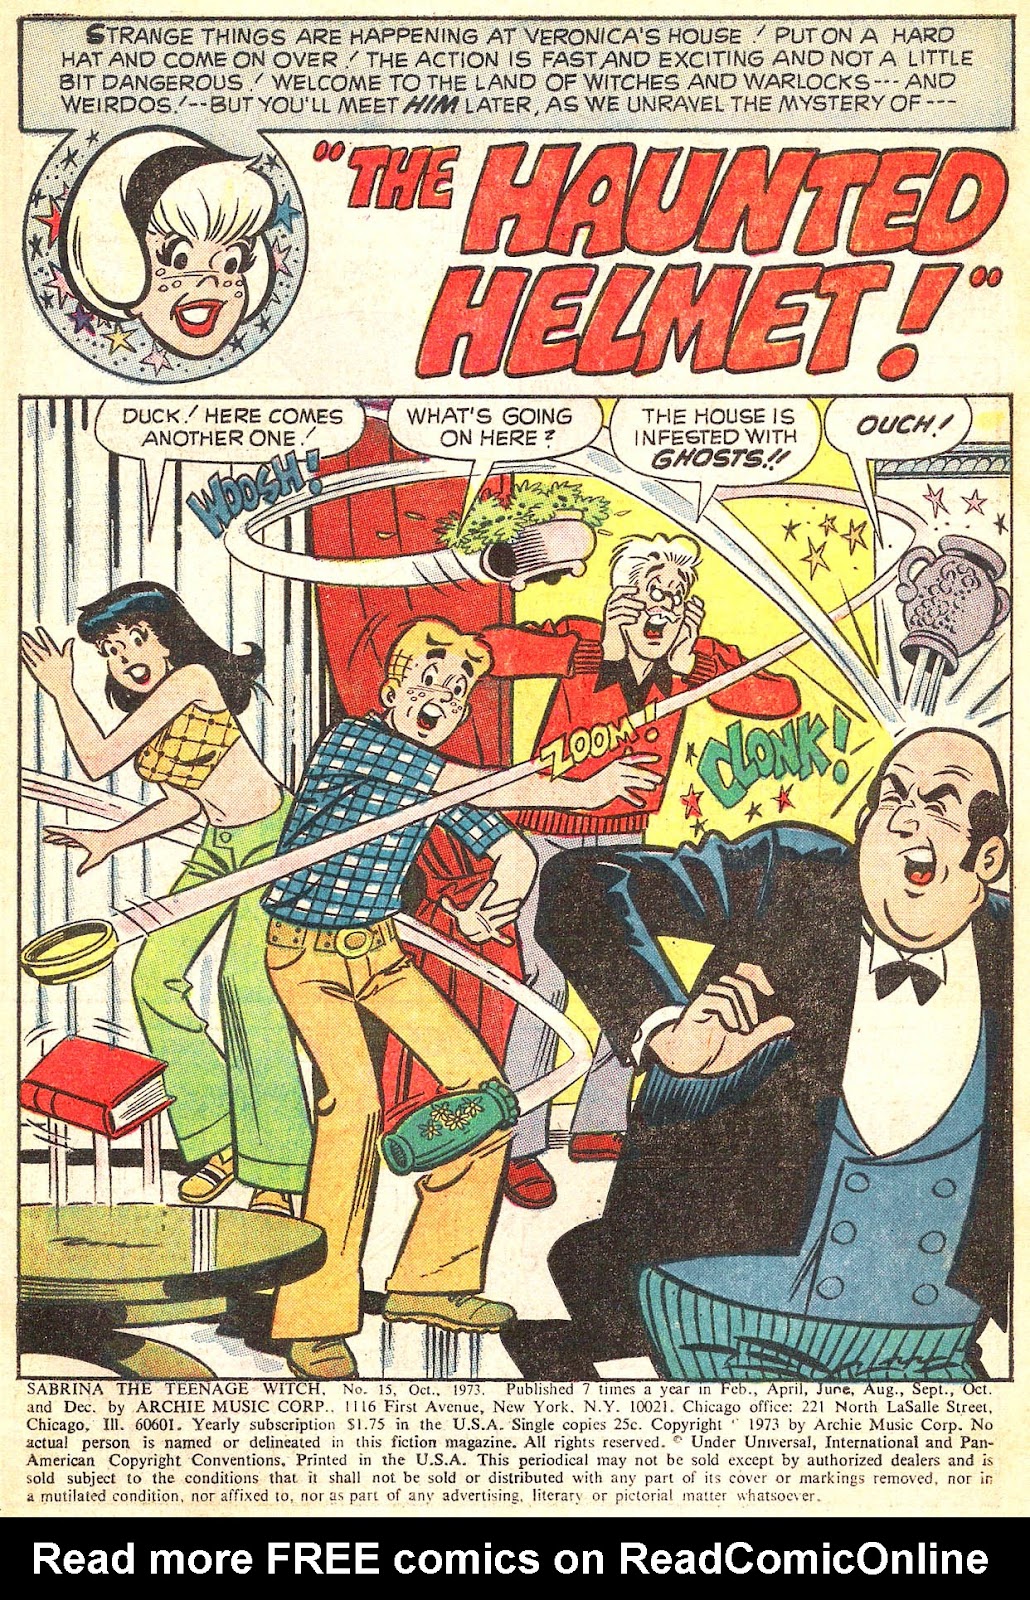 Sabrina The Teenage Witch (1971) Issue #15 #15 - English 3